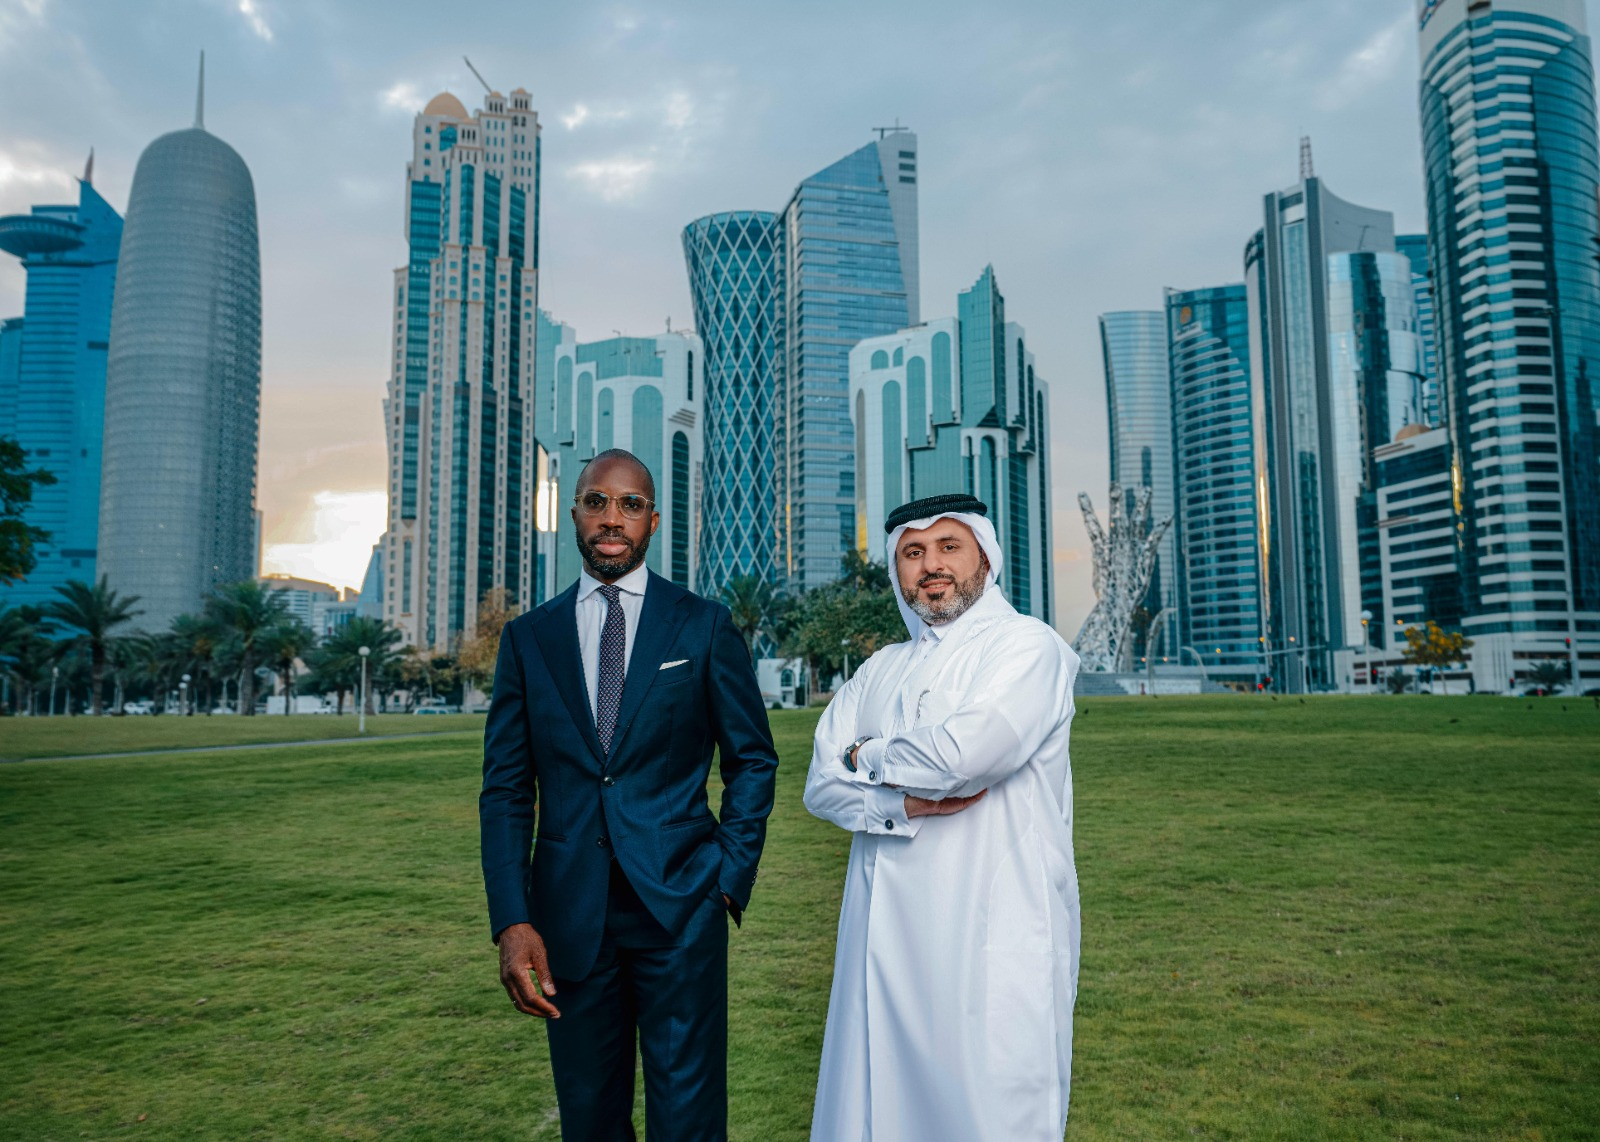 Golden Gate Ventures obtains the first closing of its new fund in the Middle East and North Africa region, valued at $100 million, led by Al Khor Holding Company, Al Attiyah Group, and Sheikh Jassim bin Jabr Al Thani.